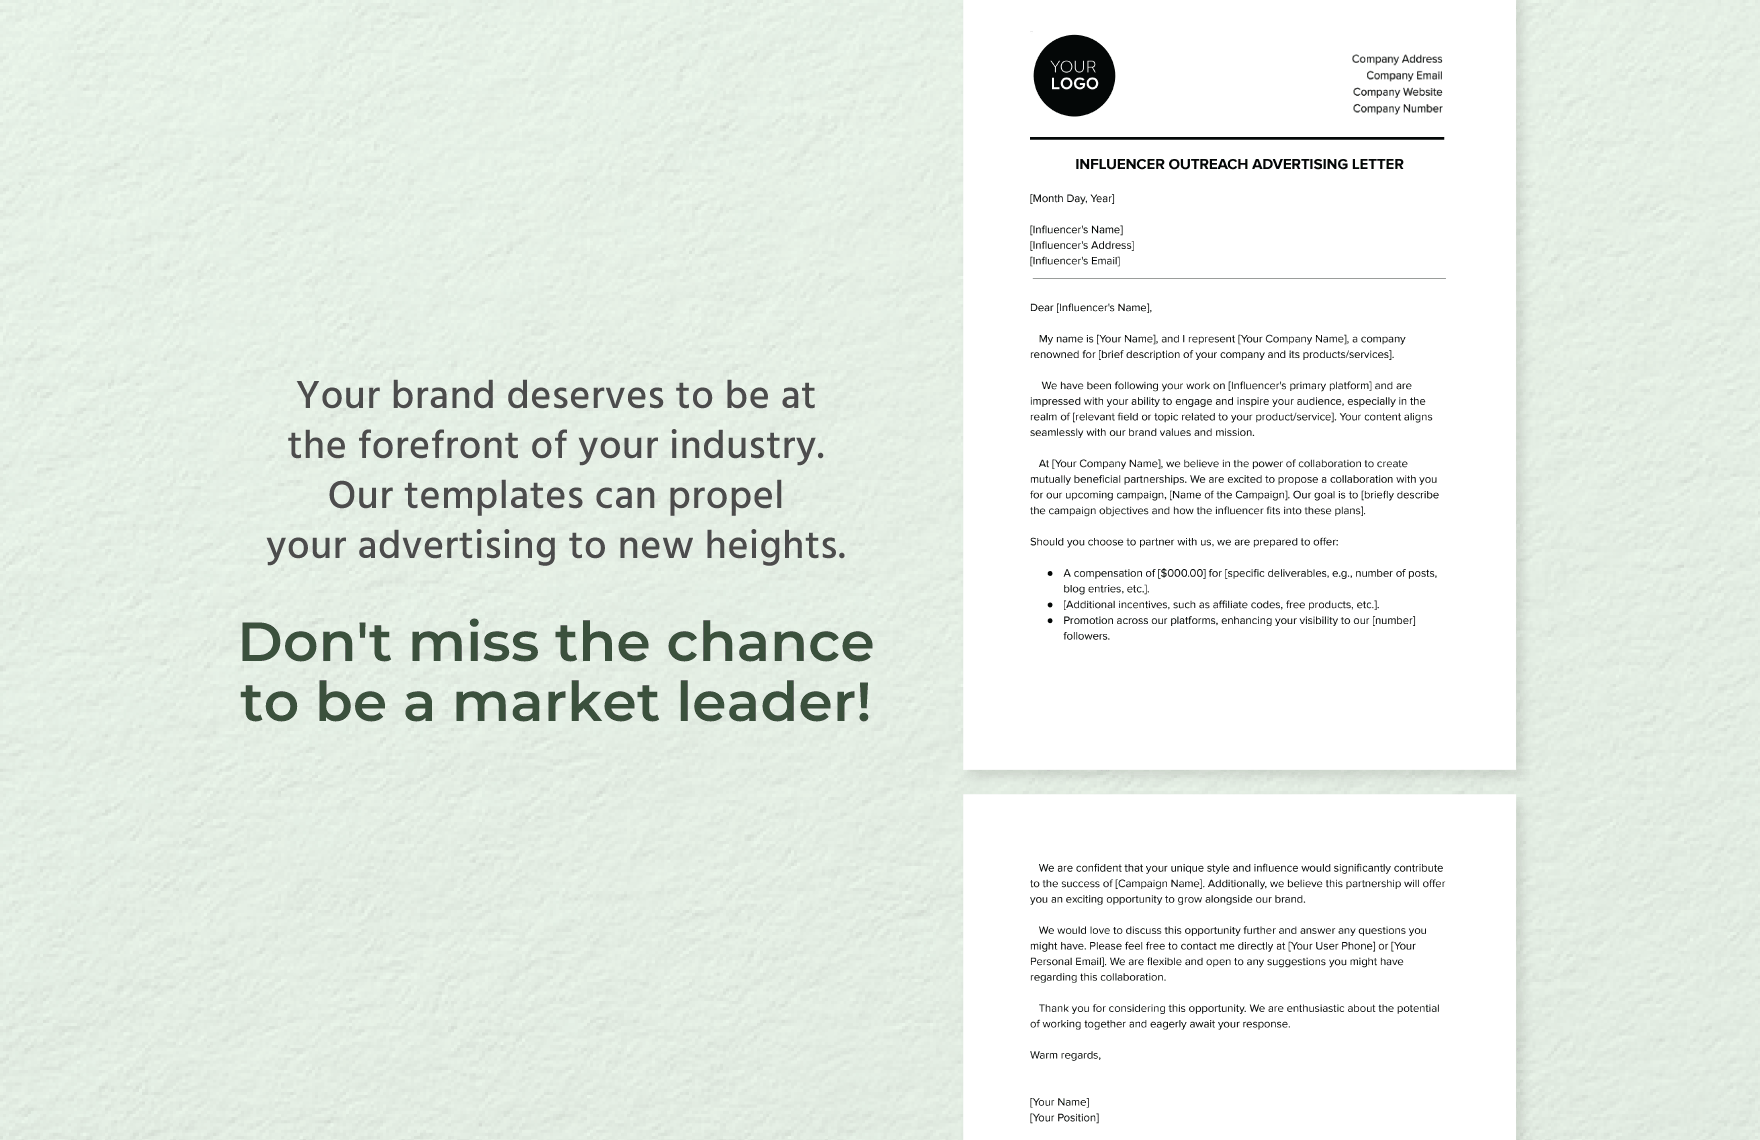 Influencer Outreach Advertising Letter Template